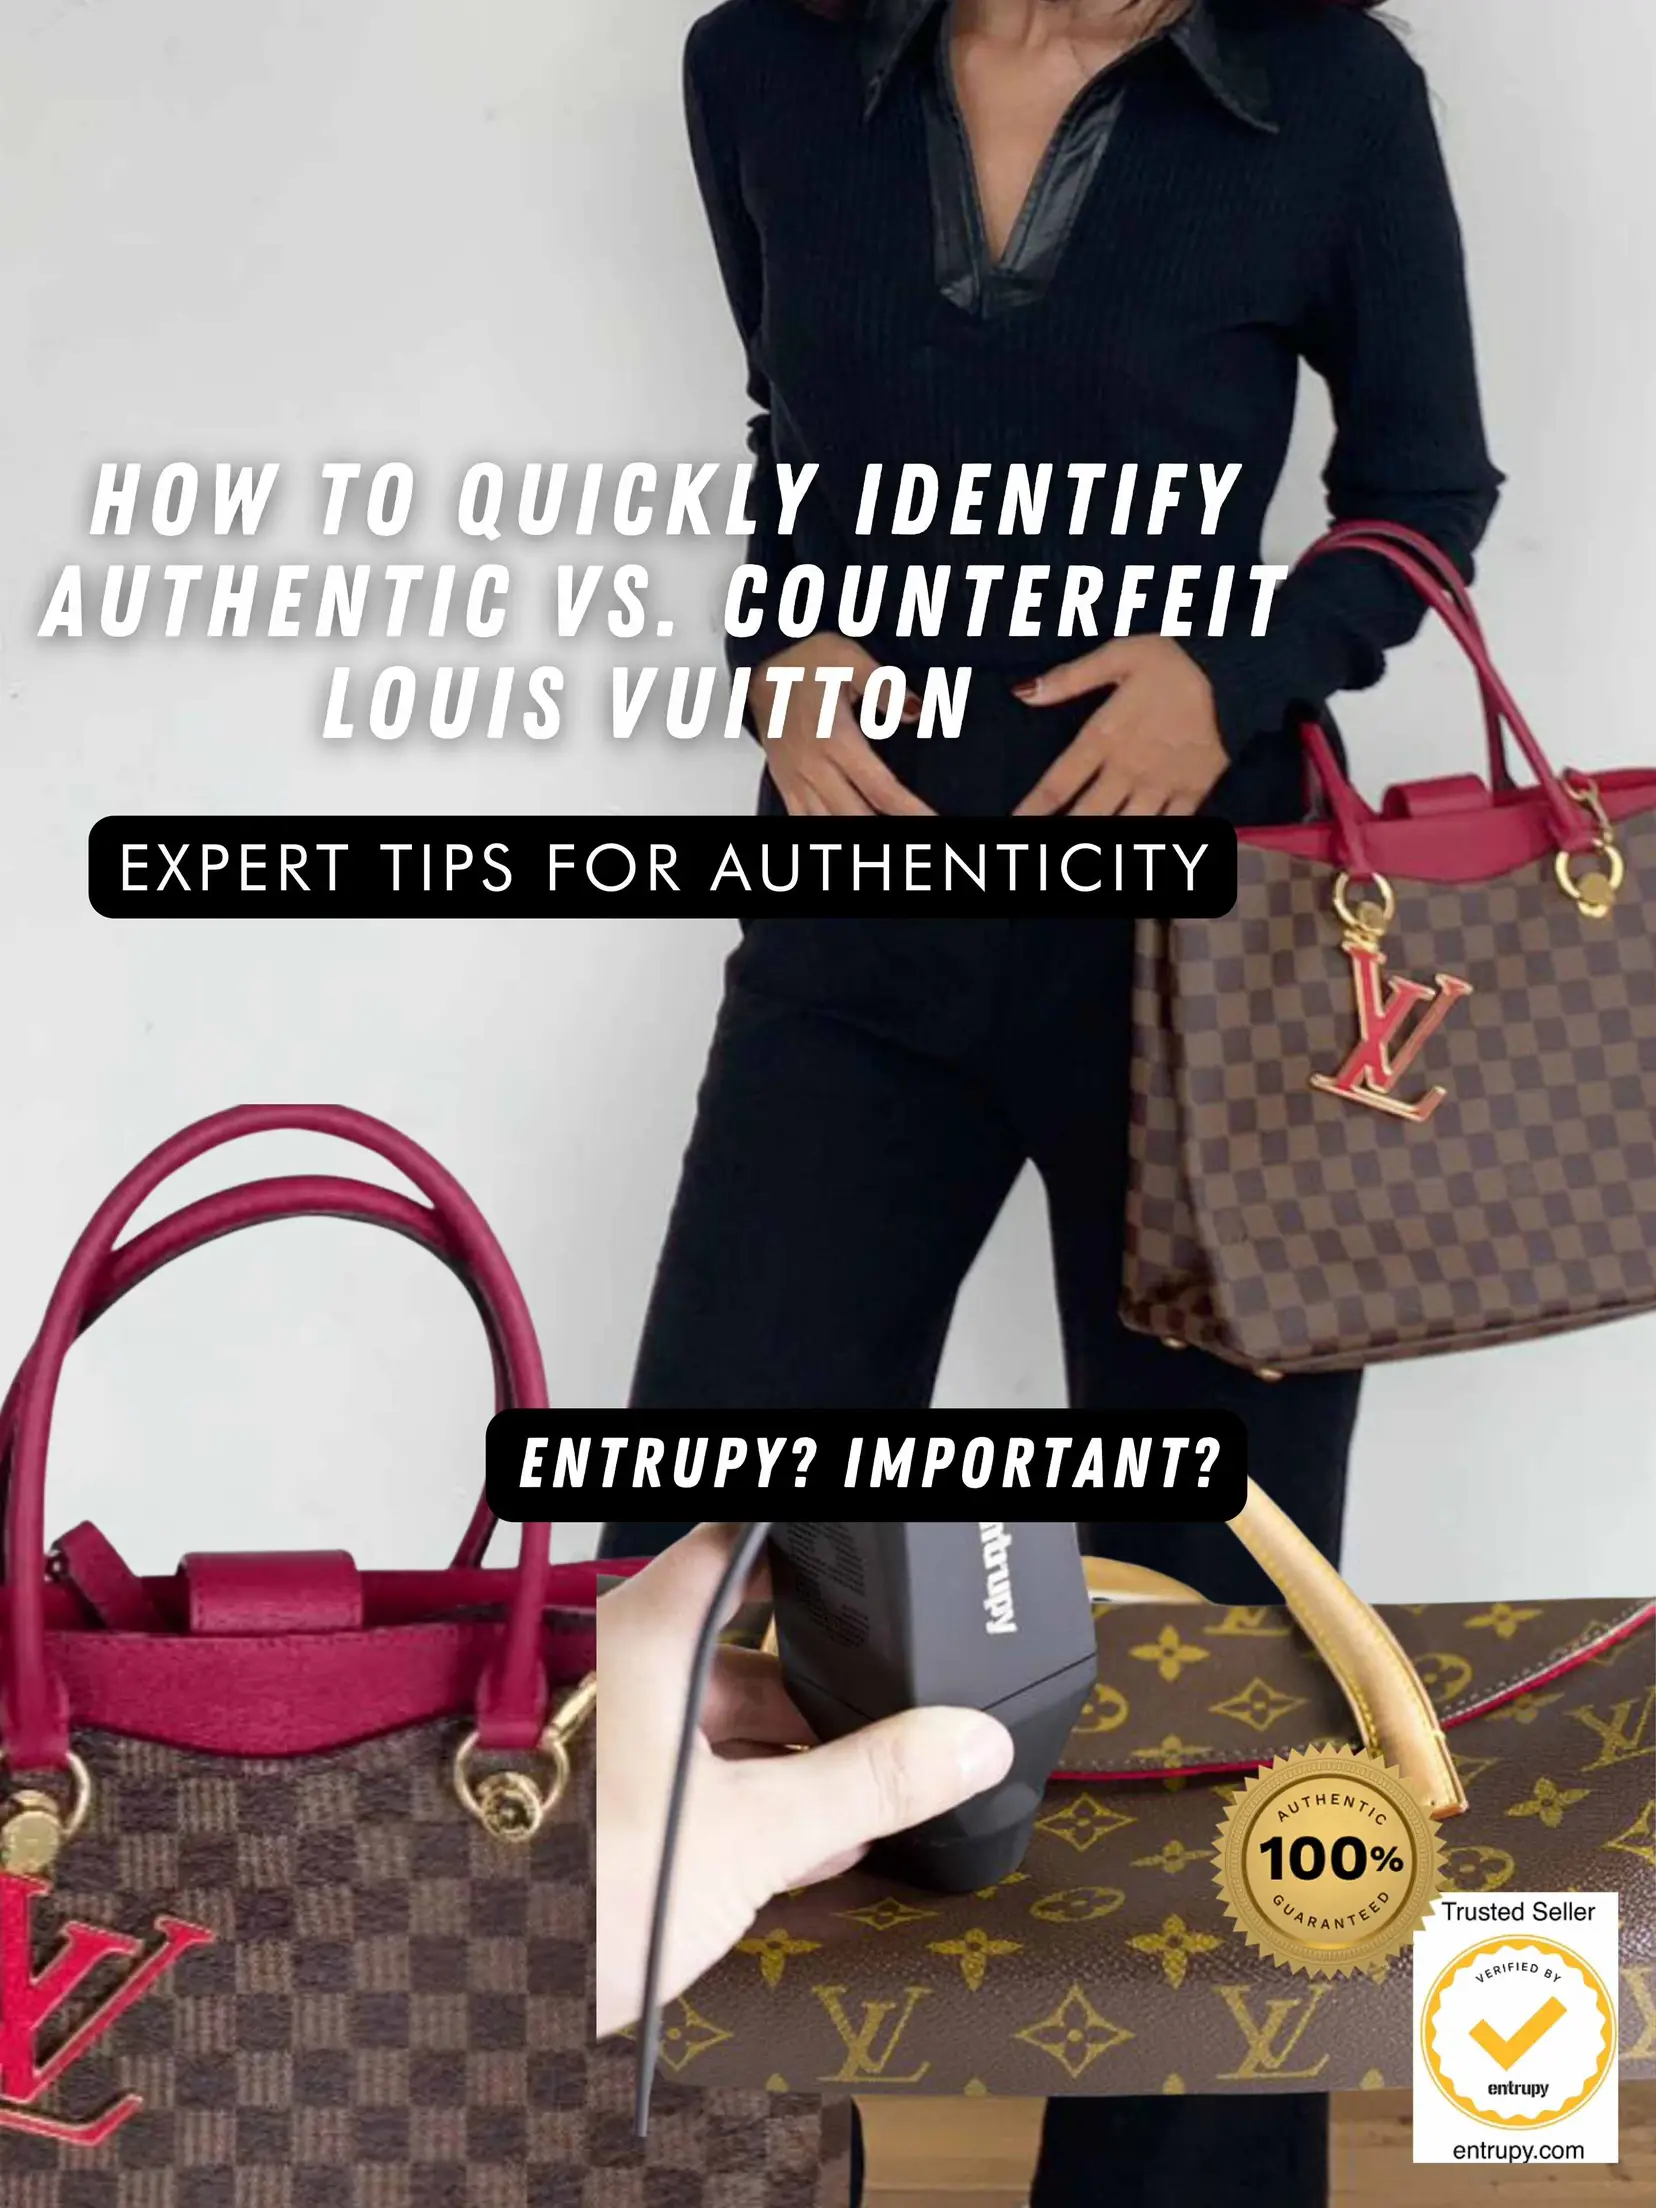 How to Quickly Identify Real vs. Fake LV